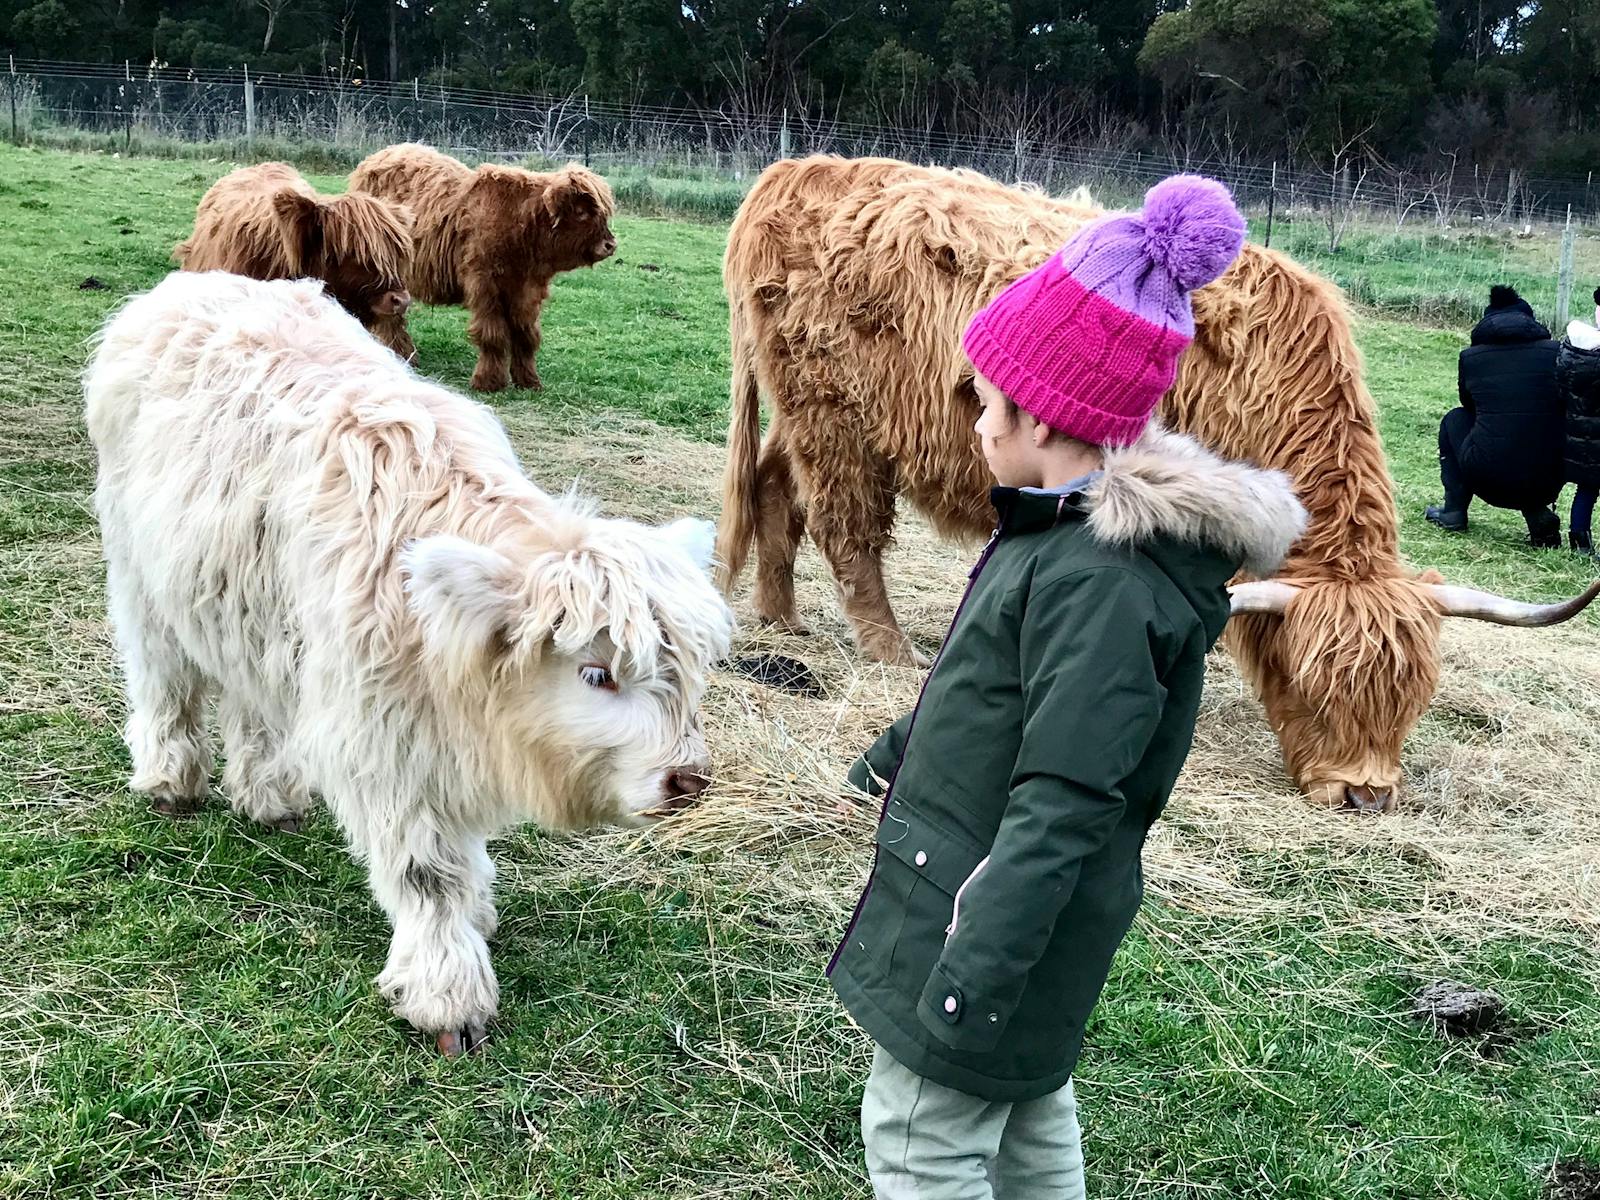 Kids and calves